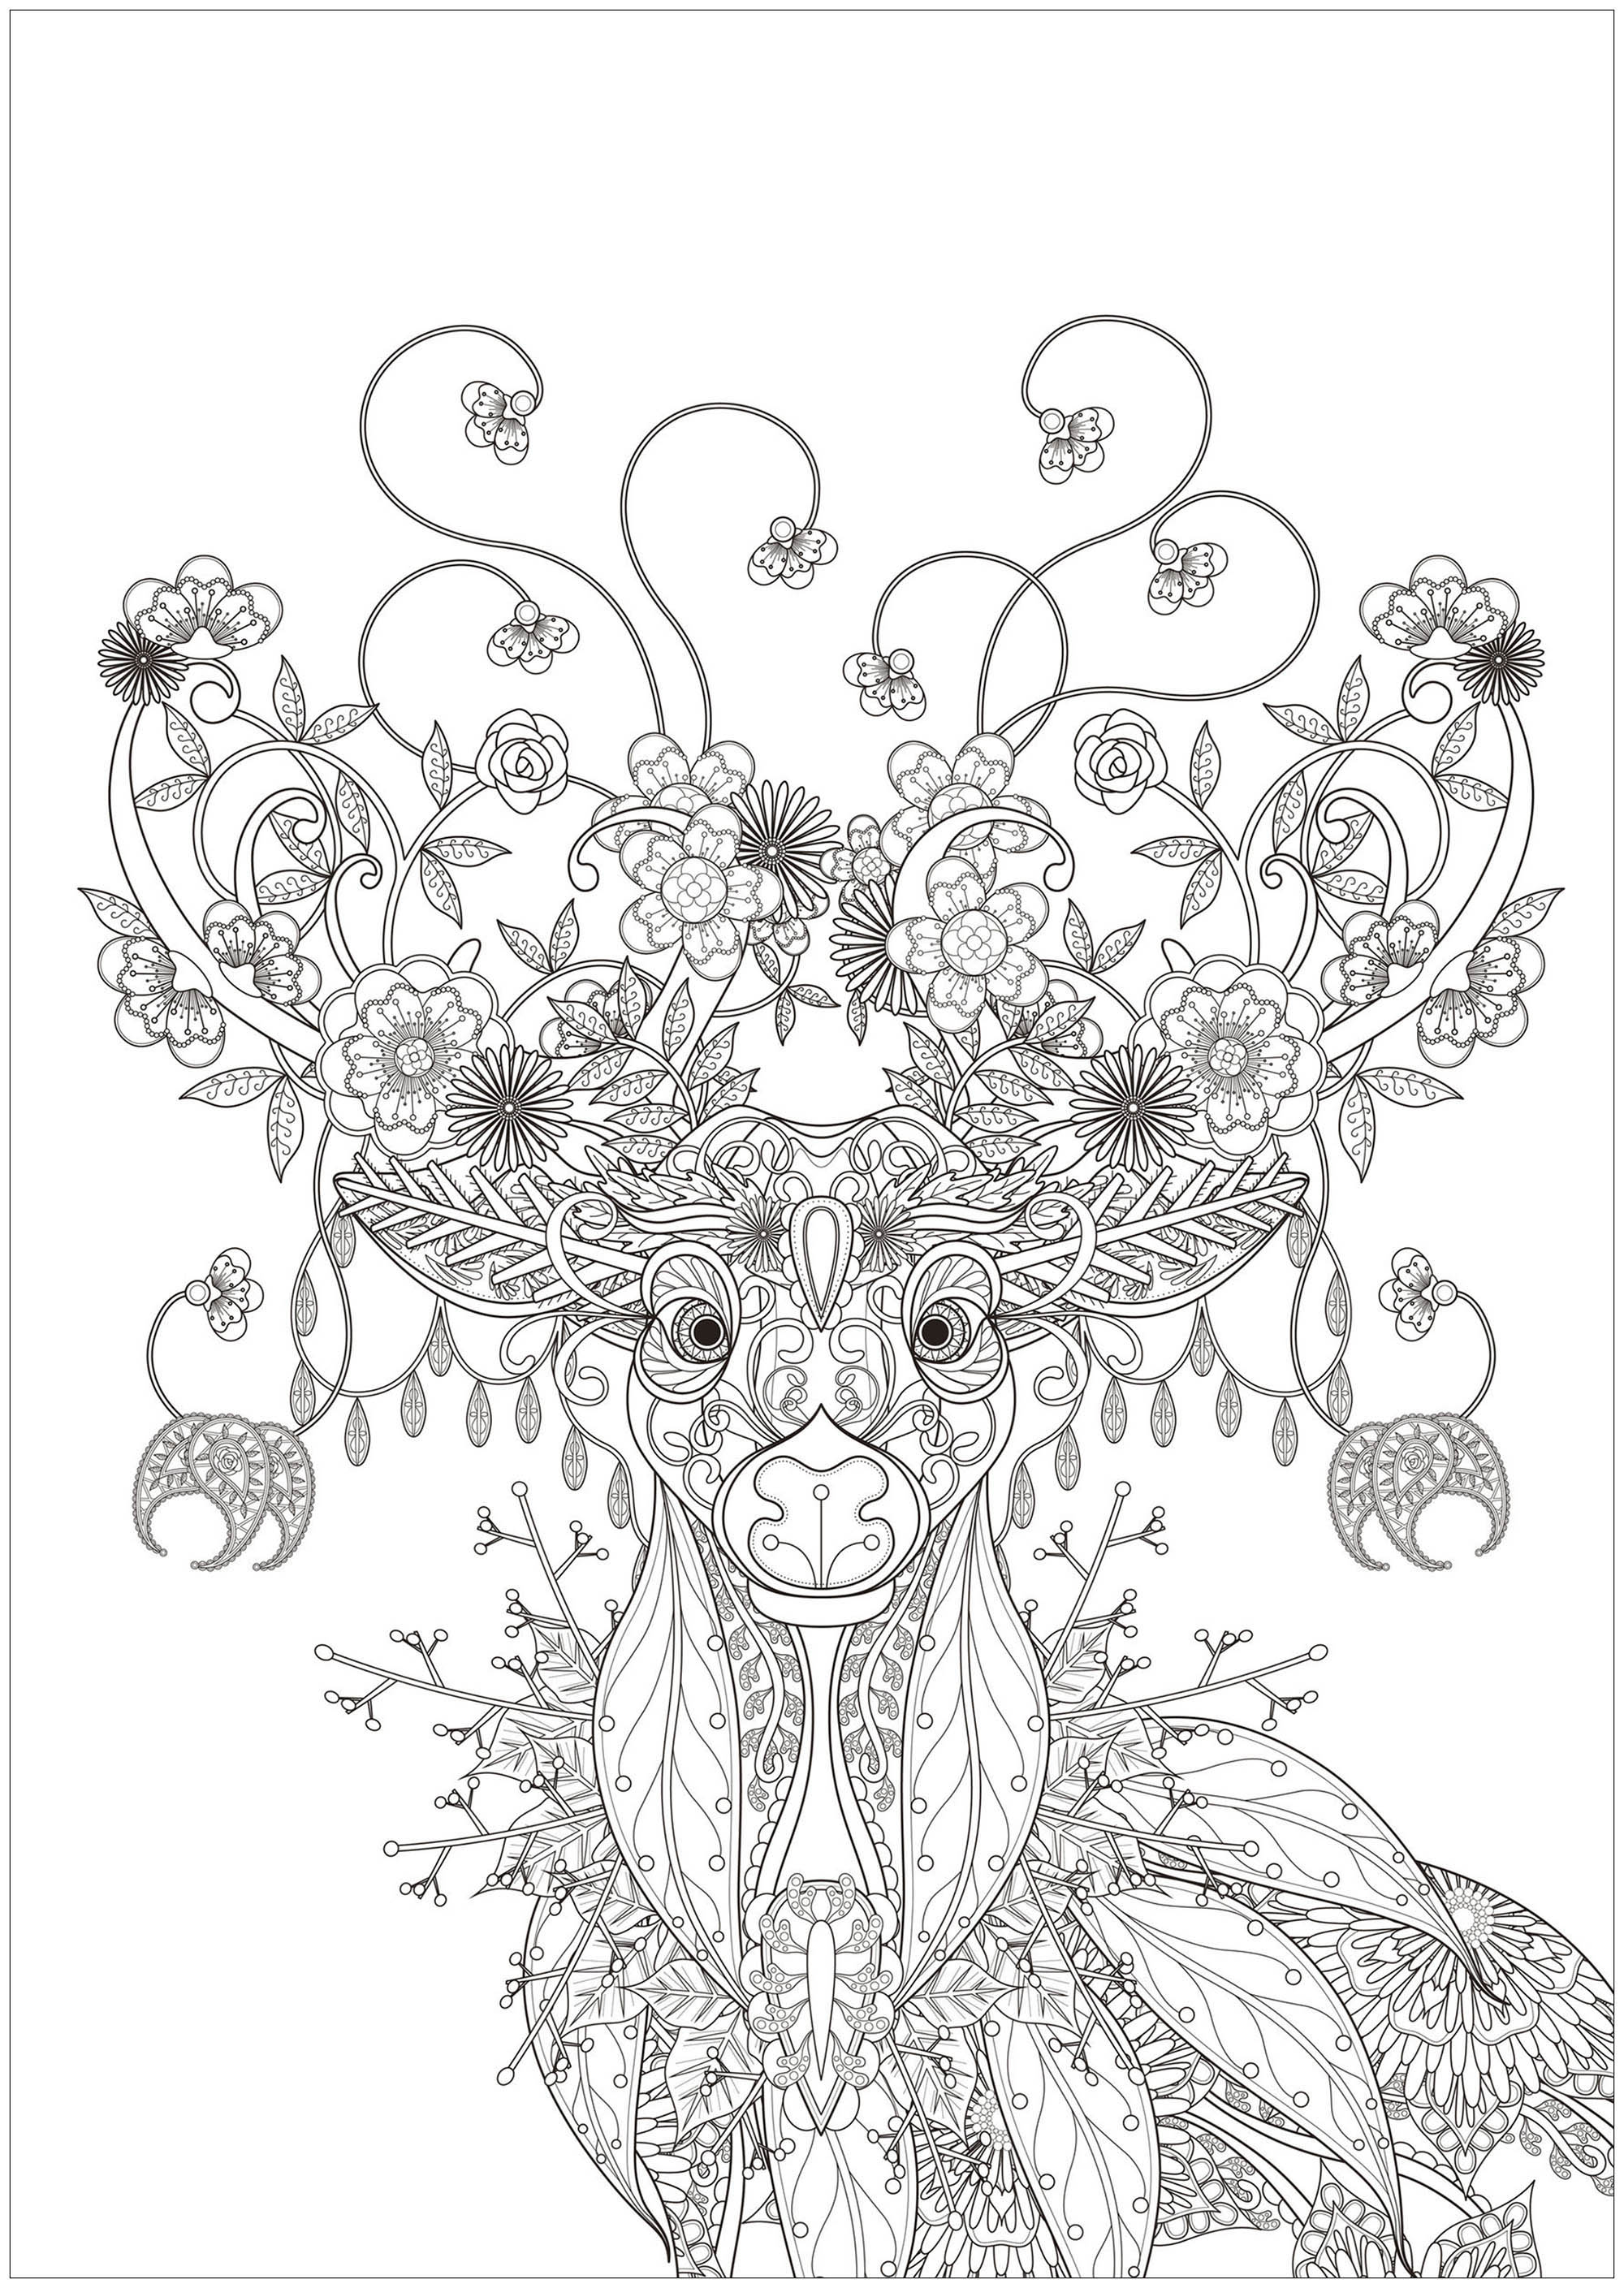 Deer with Flower patterns - Christmas Adult Coloring Pages